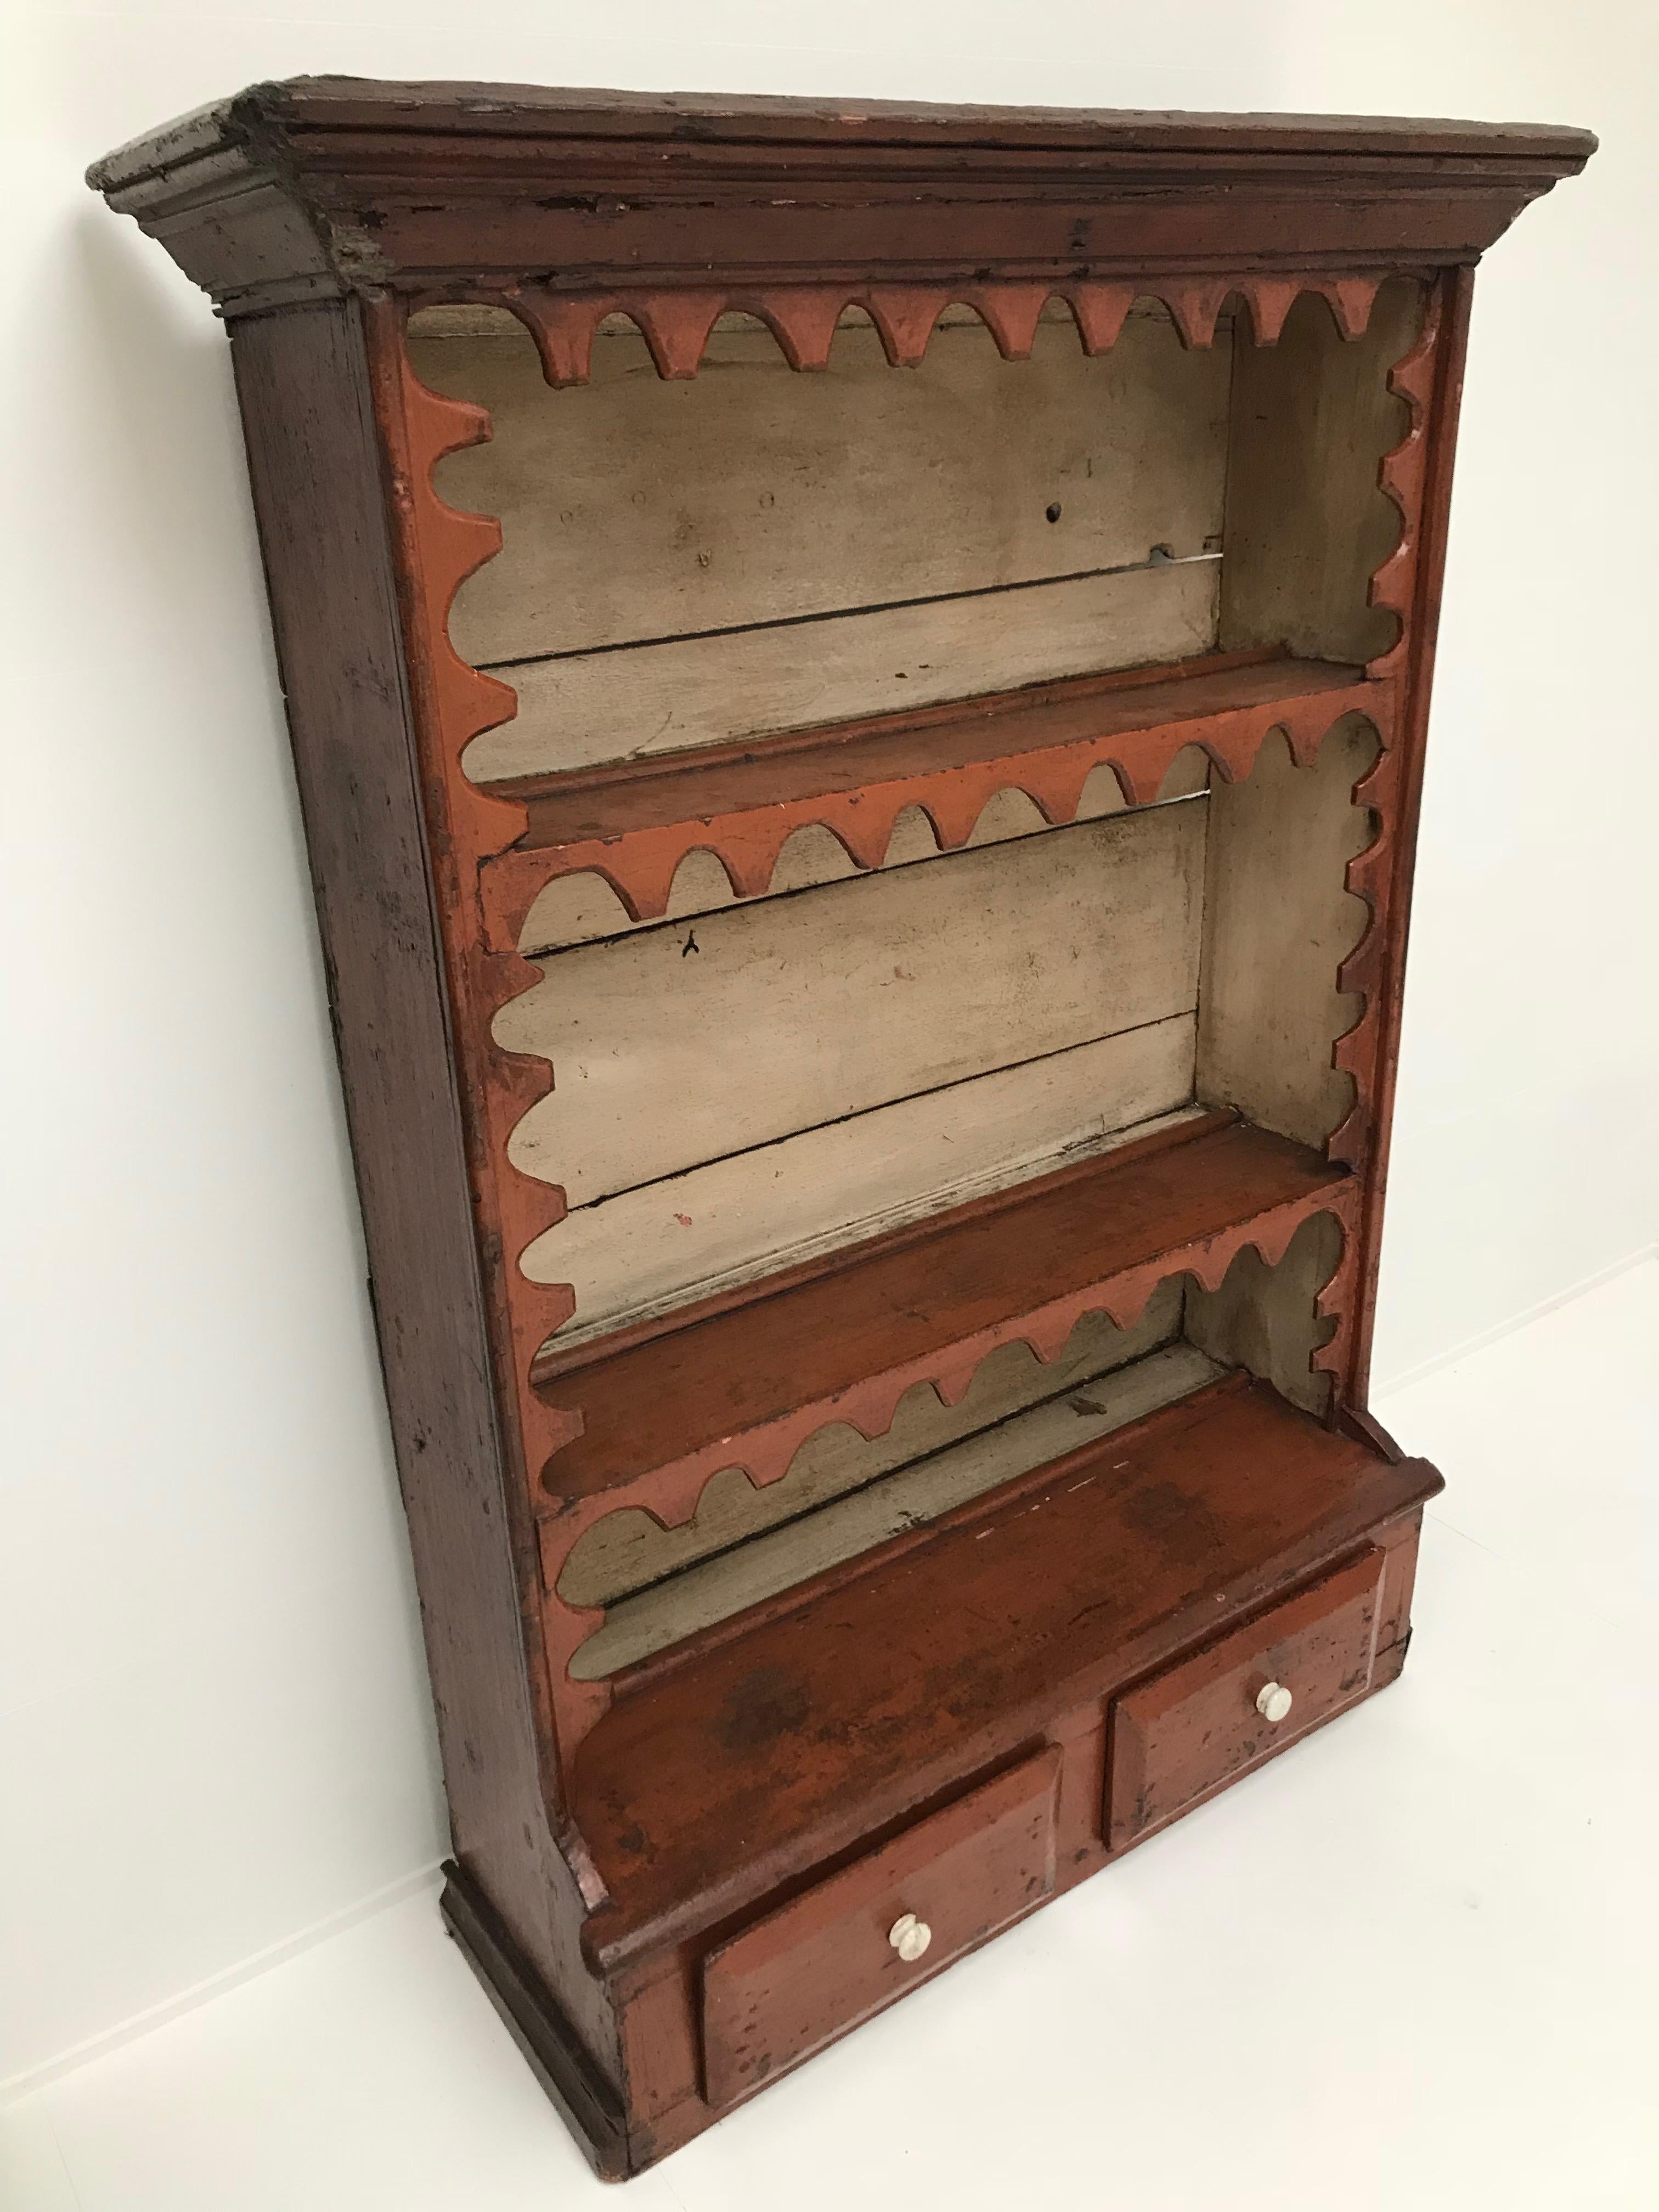 Very nice brown-red painted cupboard from a kitchen, Scotland.
Beautiful old patina.
Two drawers, ideal piece to put or hang in the kitchen.